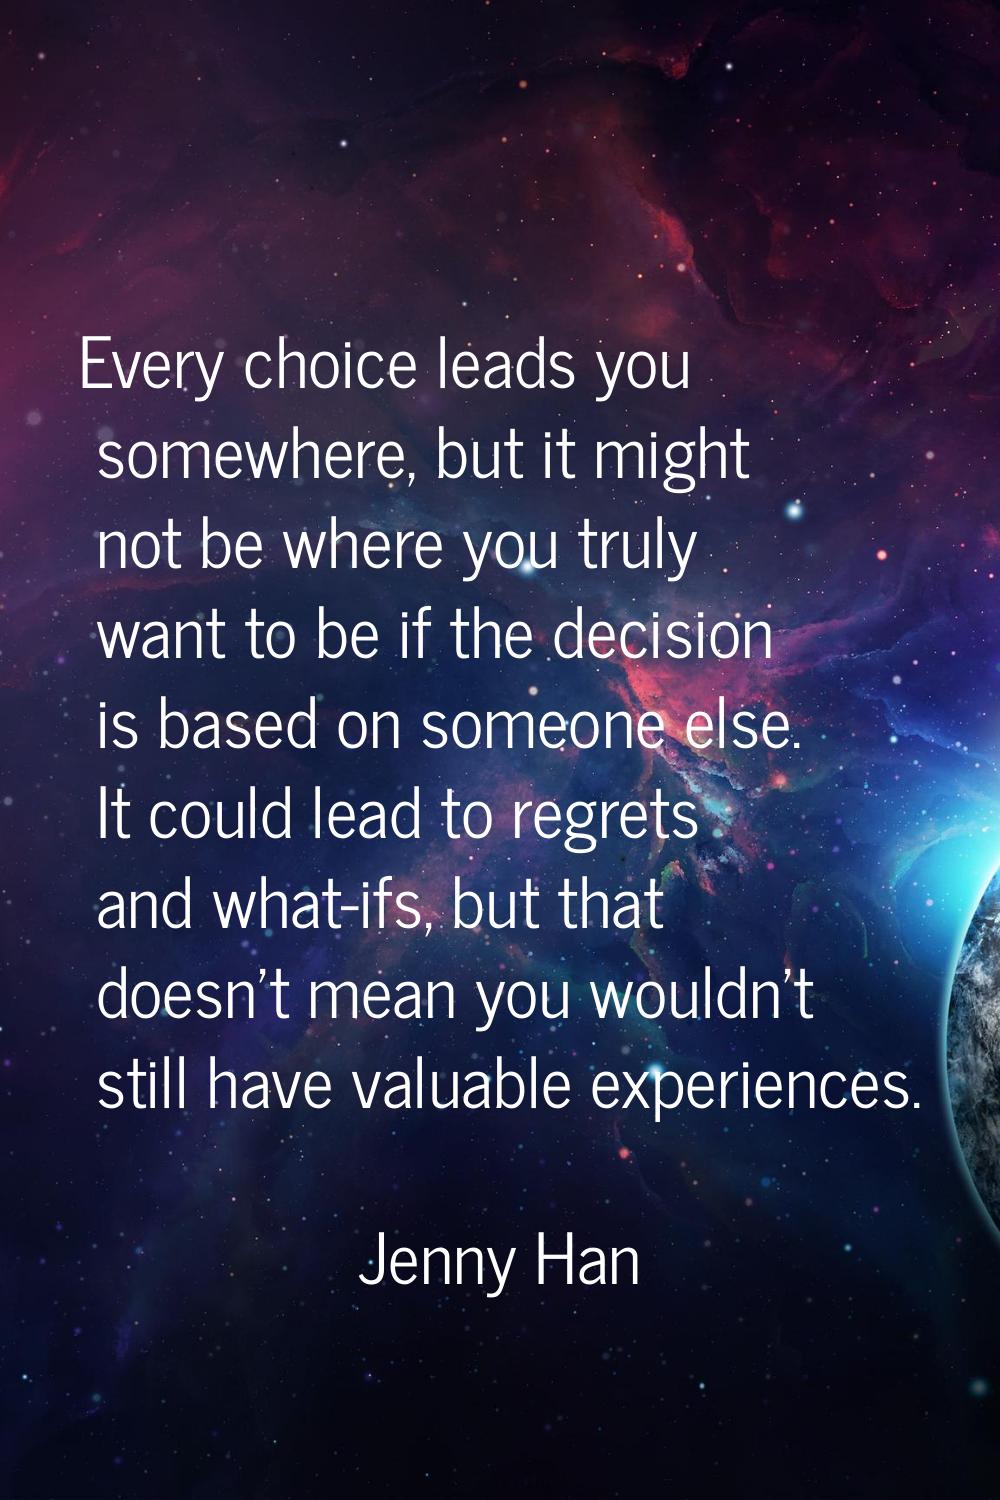 Every choice leads you somewhere, but it might not be where you truly want to be if the decision is